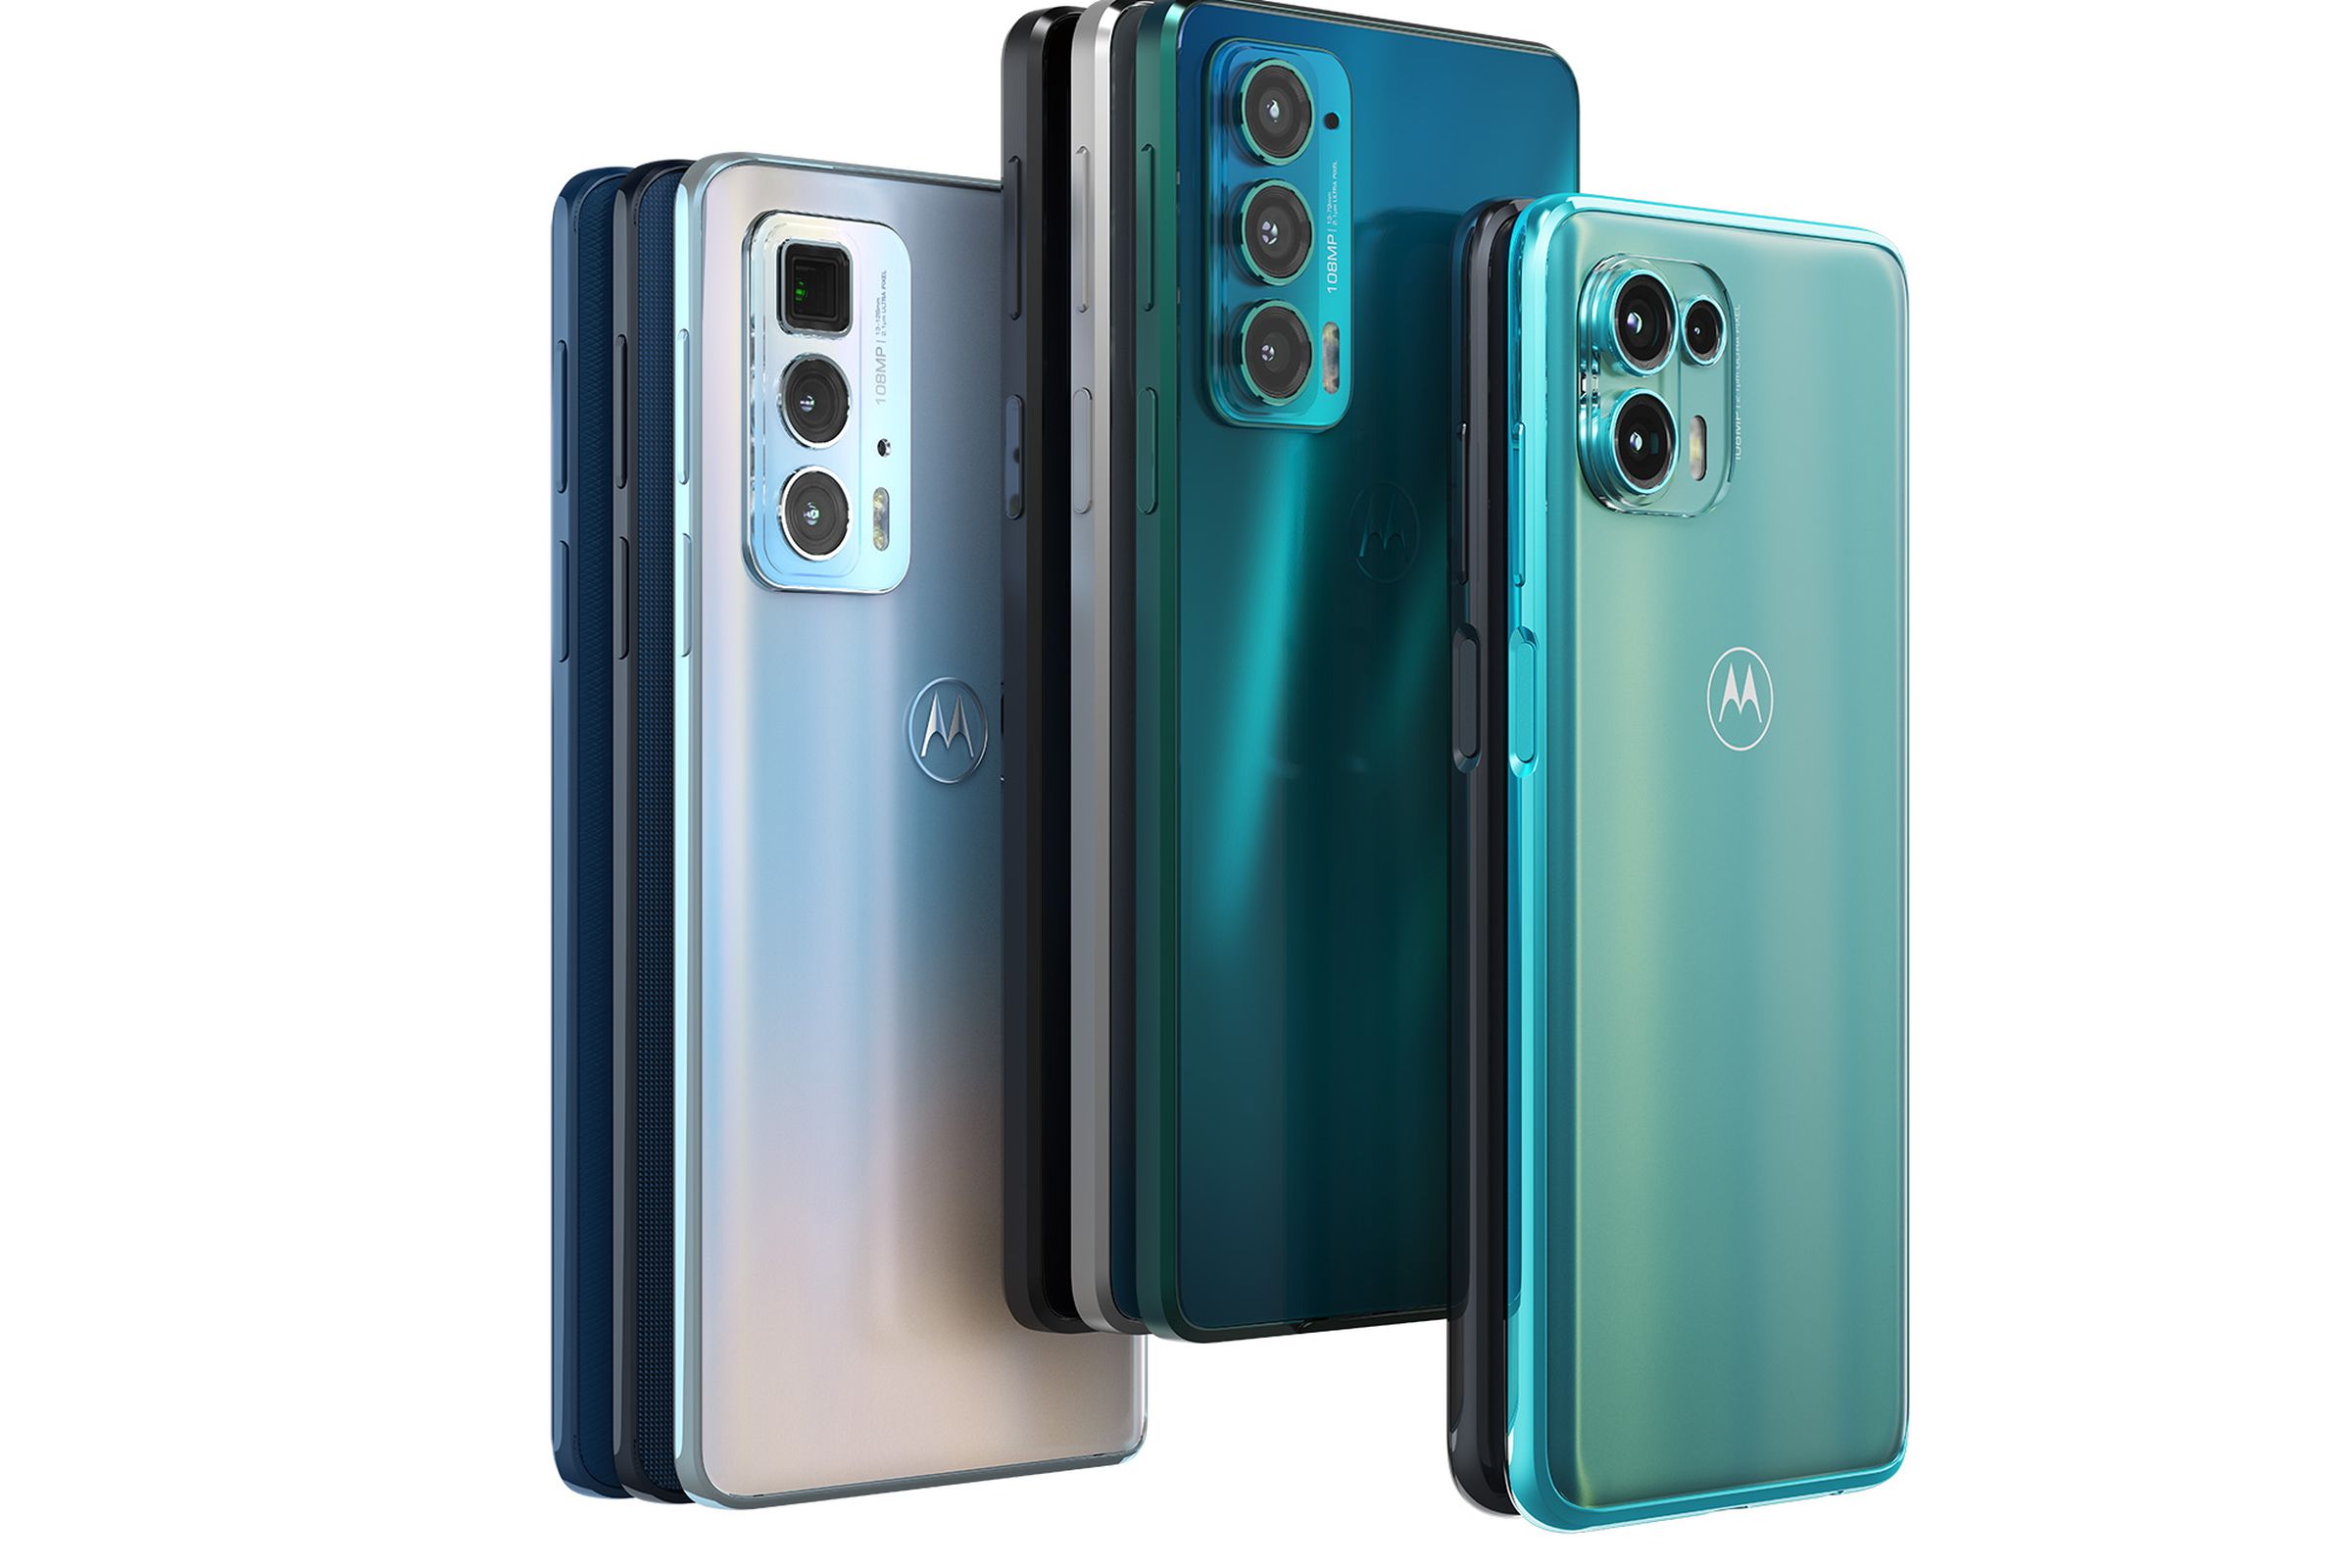 The Motorola Edge 20 Pro, Edge 20, and Edge 20 Lite all support 5G and come with a 6.7-inch OLED.